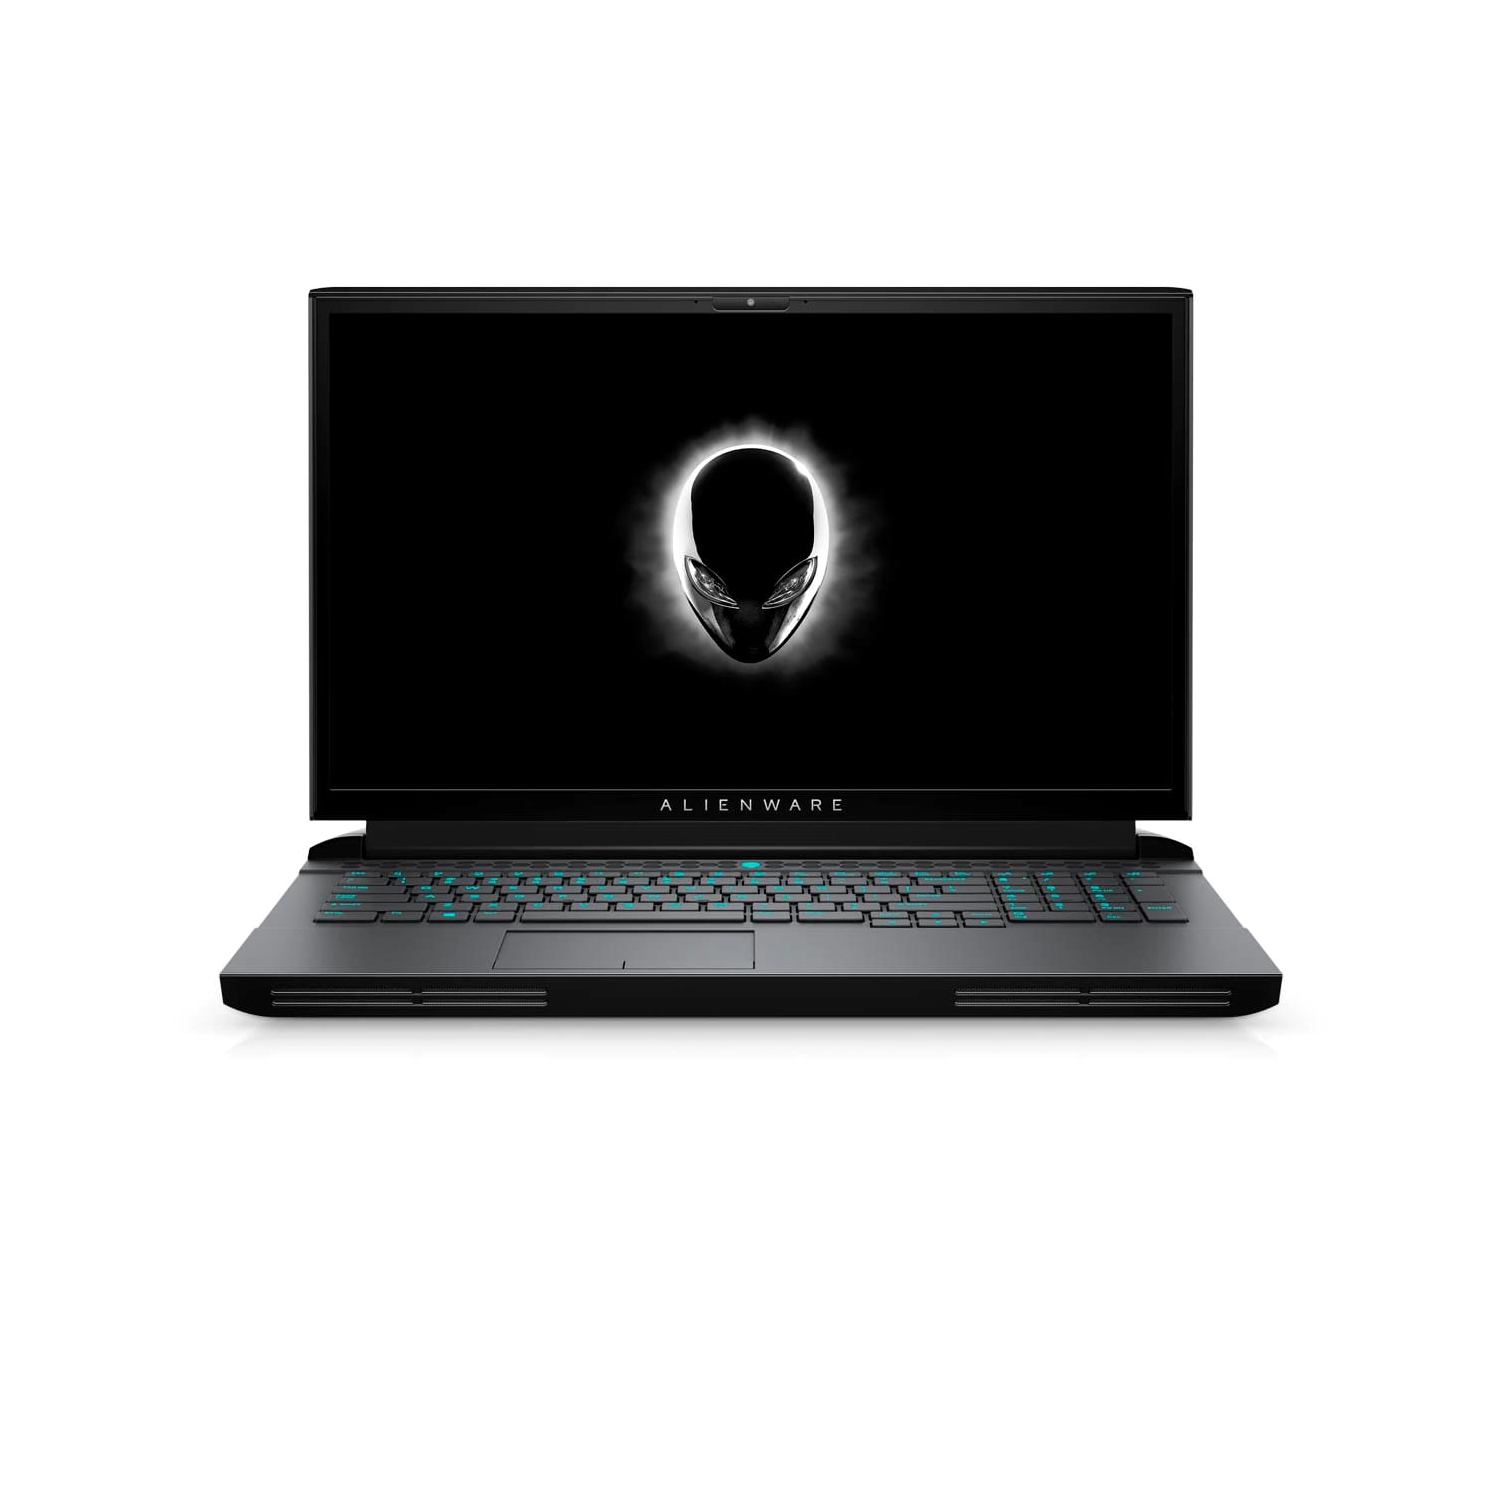 Refurbished (Excellent) - Dell Alienware 17 51m R2 Gaming Laptop (2020), 17.3" FHD, Core i7 - 1TB HDD + 256GB SSD - 64GB RAM - 1660 Ti, 4.8 GHz - 10th Gen CPU Certified